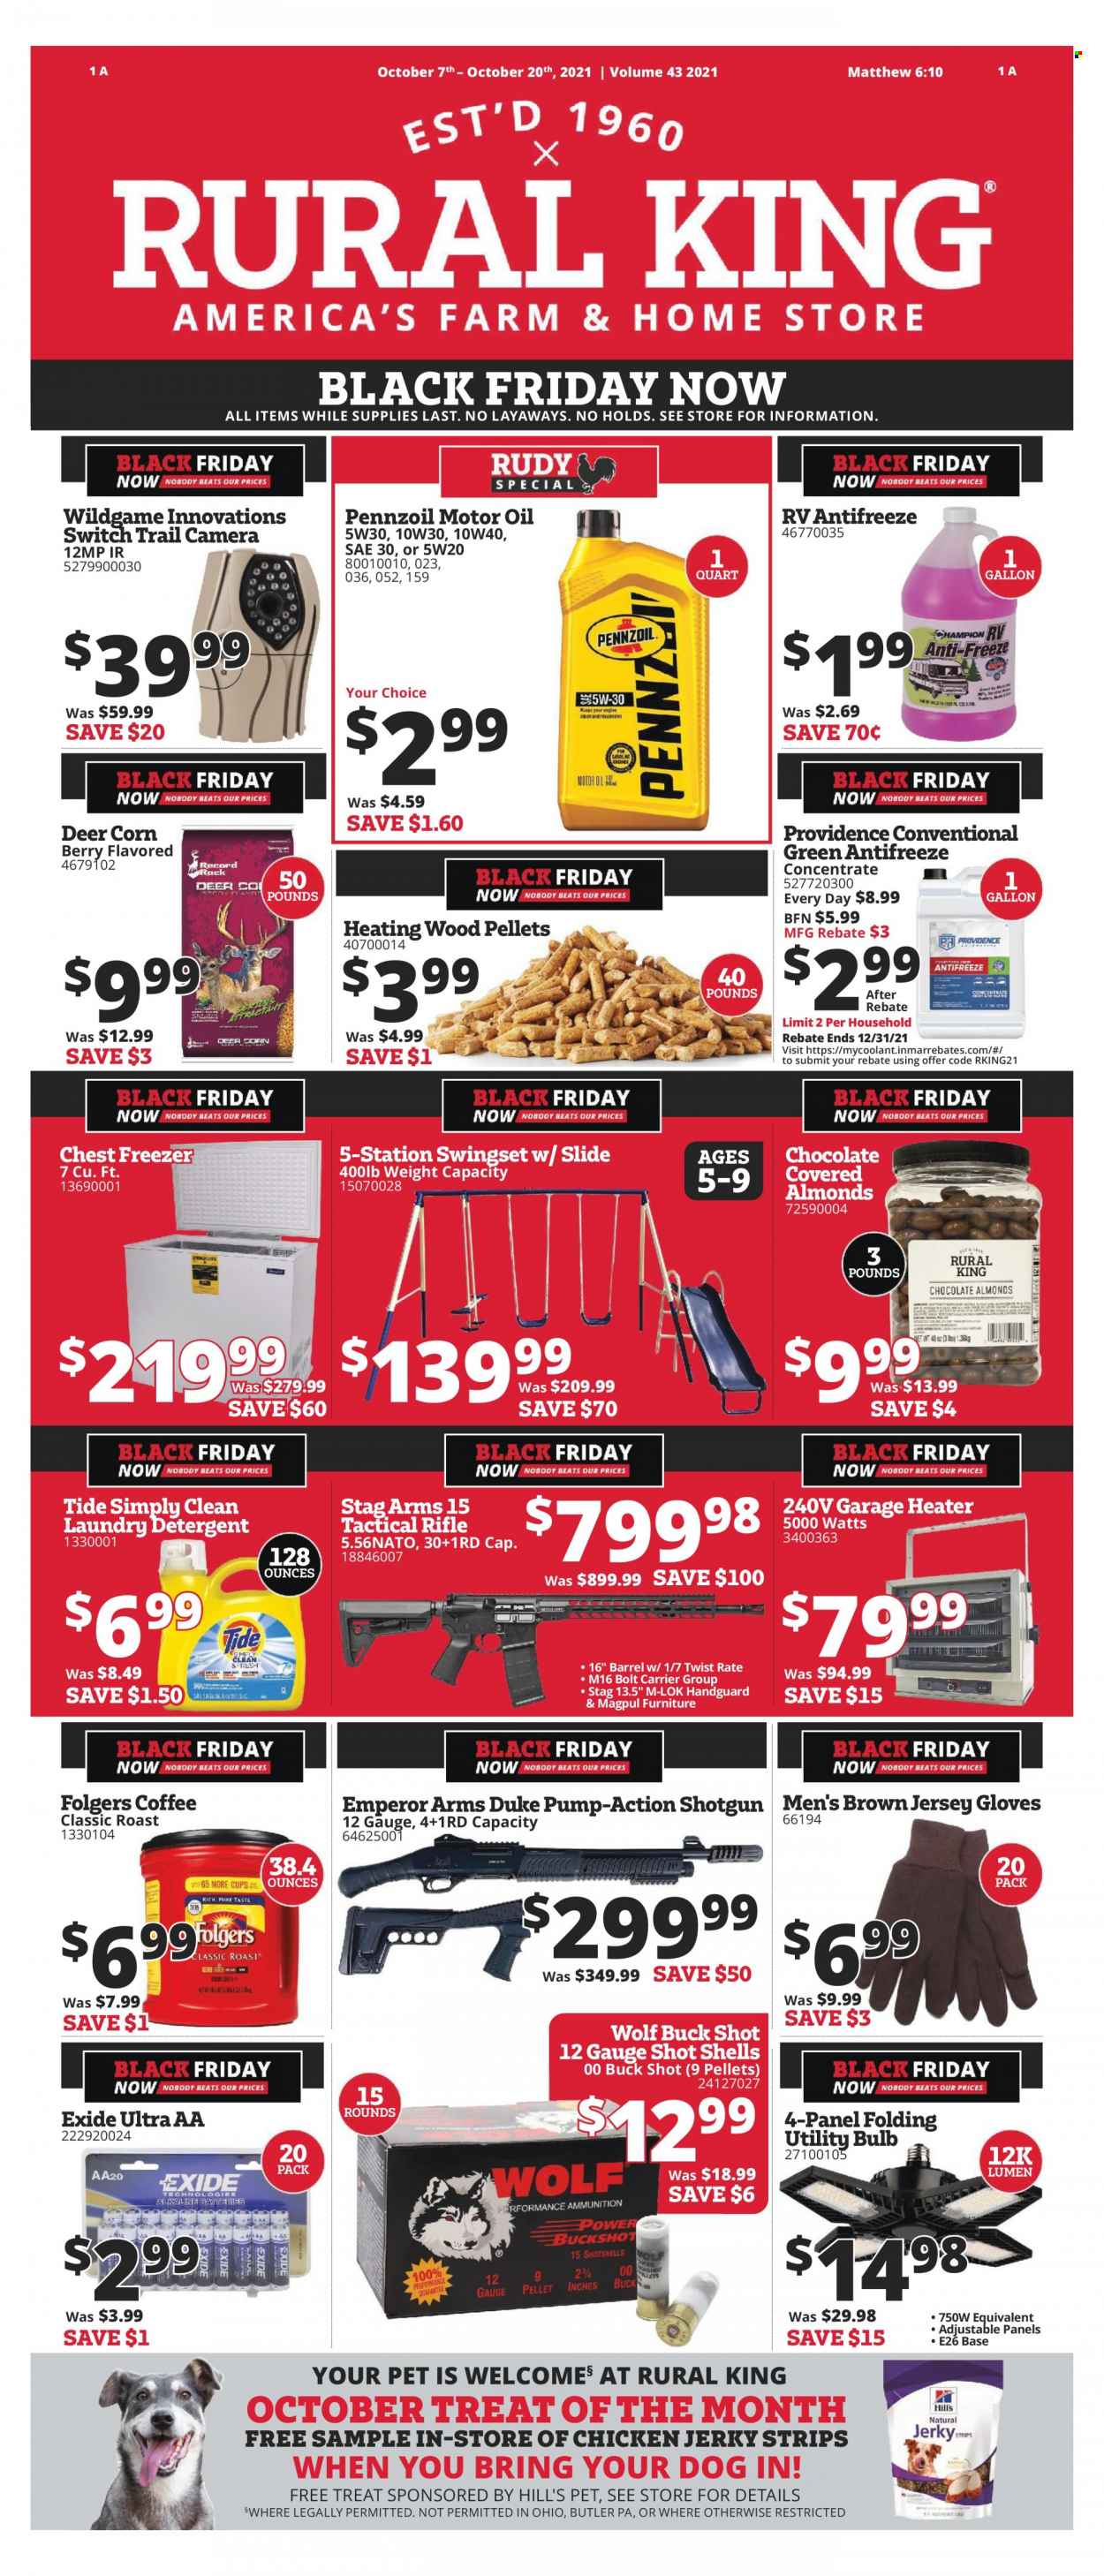 thumbnail - Rural King Flyer - 10/07/2021 - 10/20/2021 - Sales products - corn, oil, almonds, coffee, Folgers, Tide, laundry detergent, gloves, bulb, Hill's, camera, trail cam, freezer, chest freezer, jersey, rifle, shotgun, Magpul, swing set, heater, pump, antifreeze, motor oil, Pennzoil. Page 1.